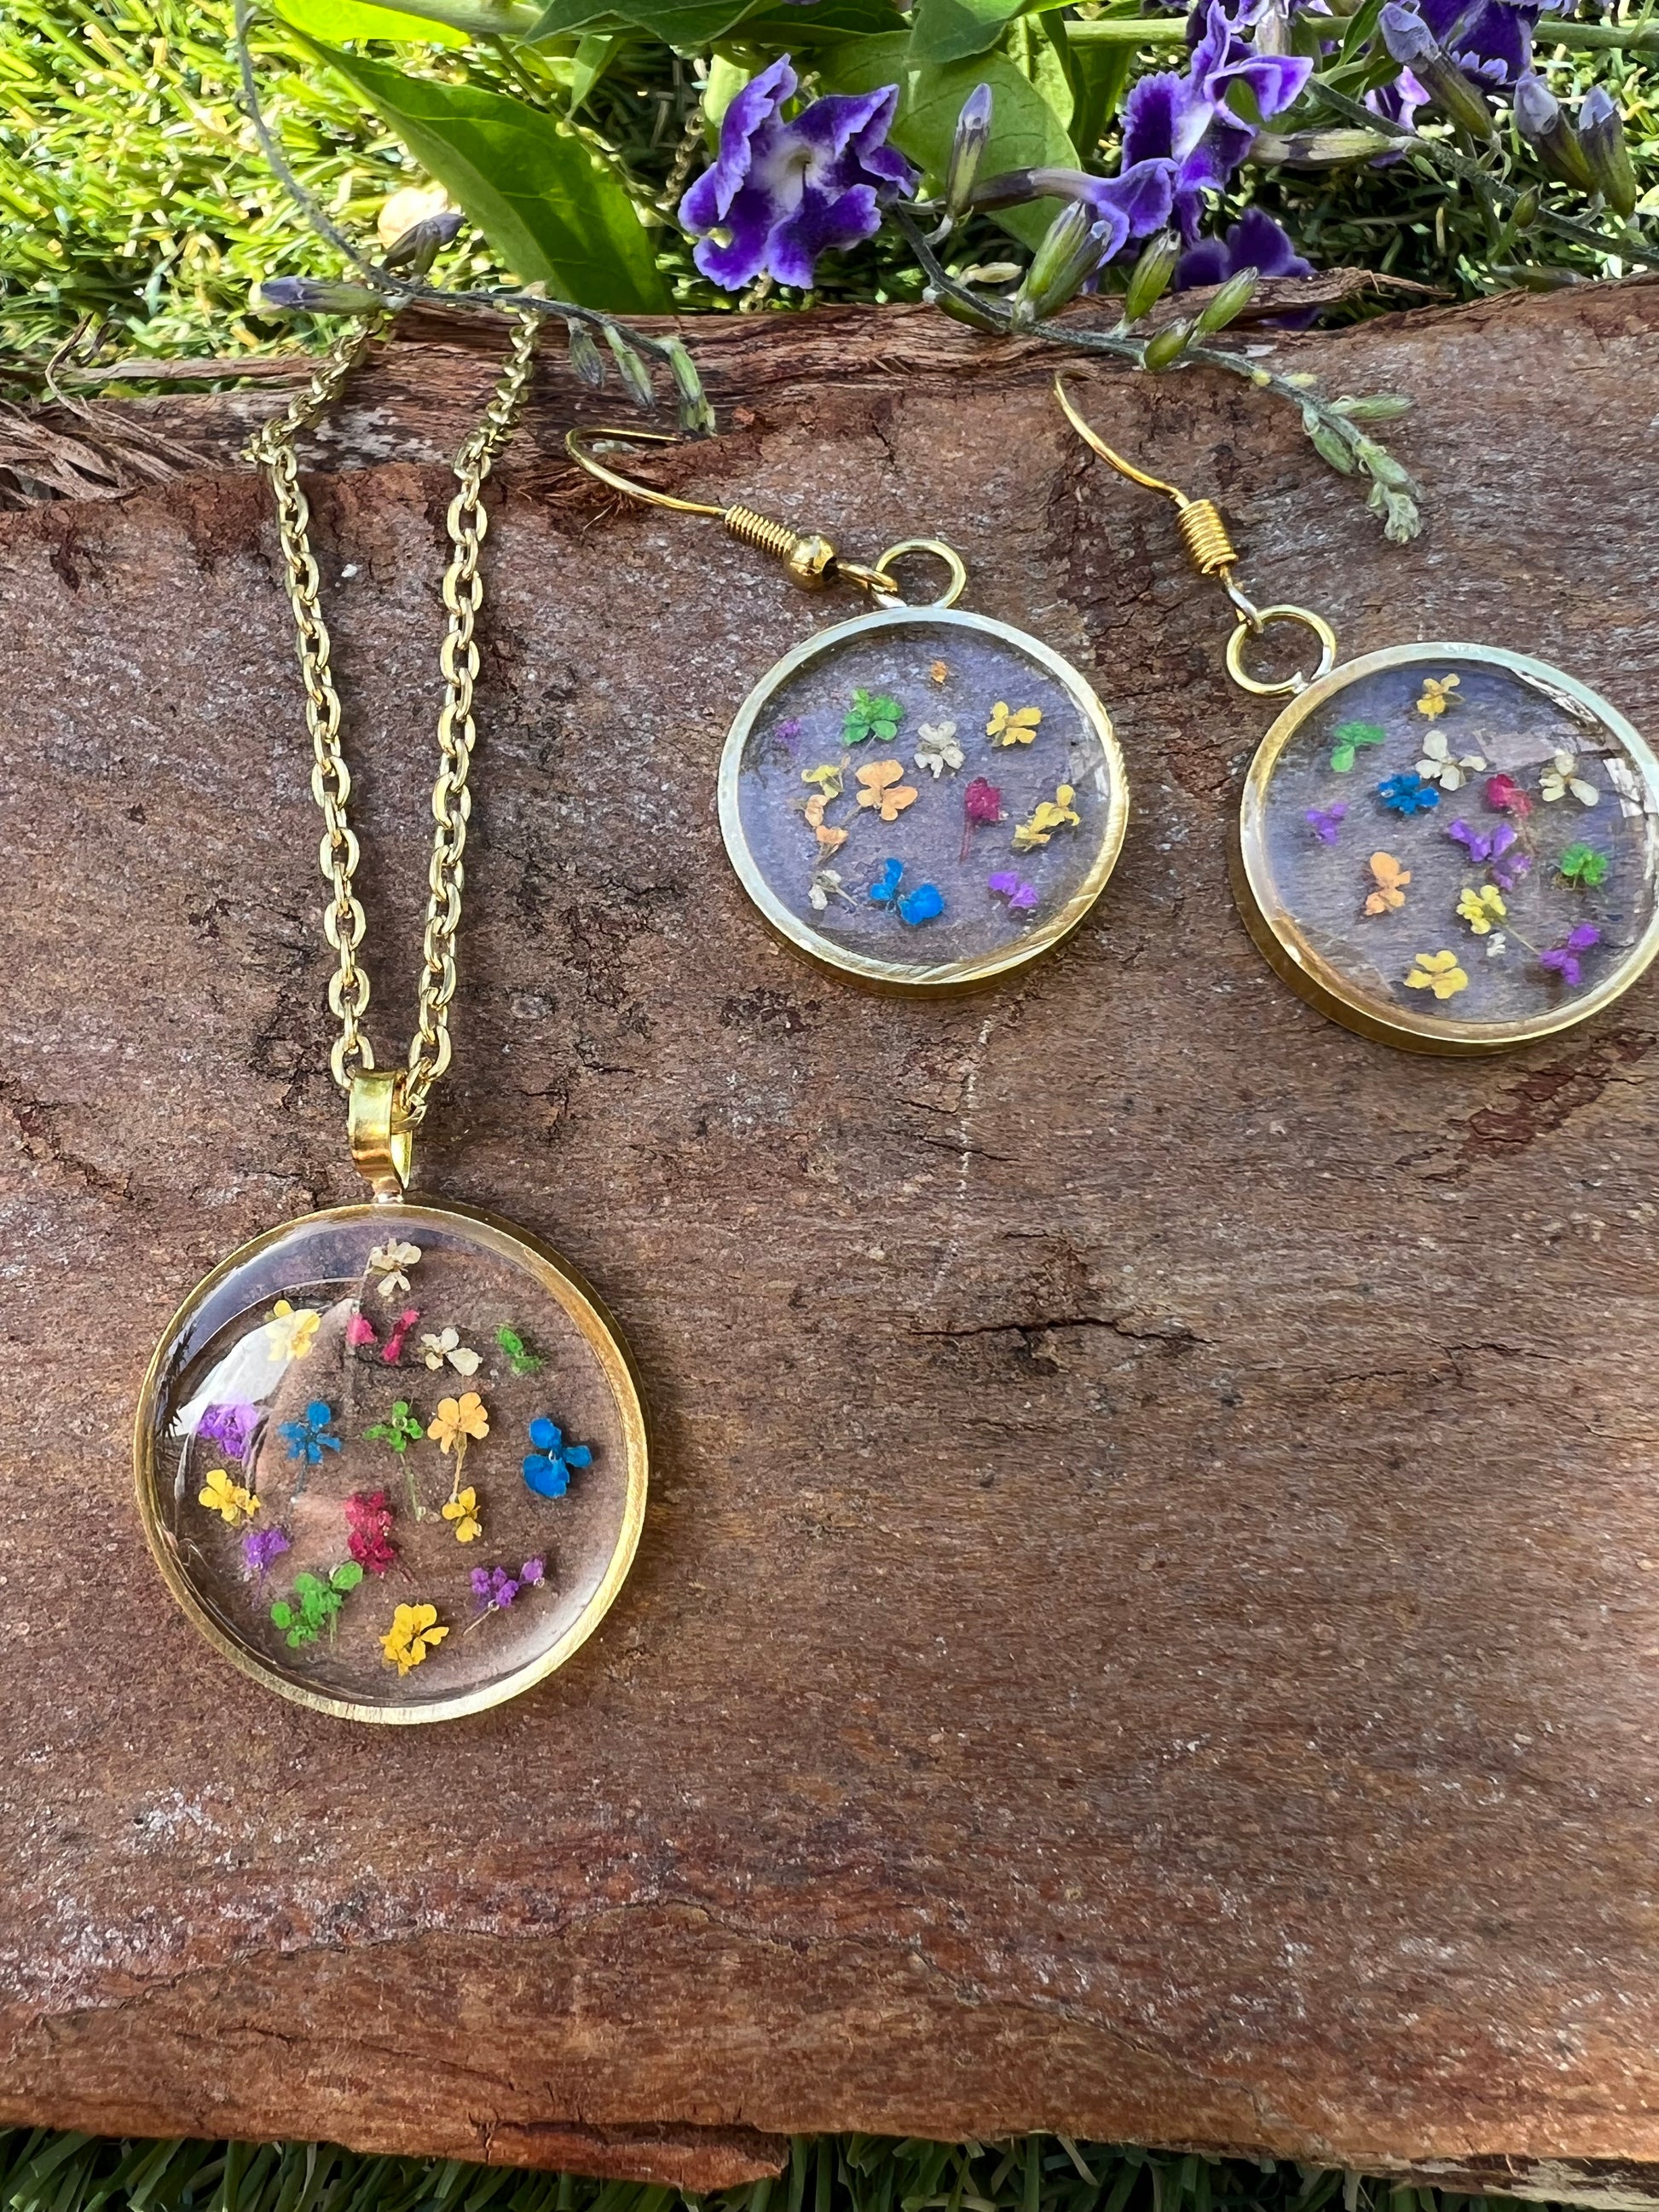 blast of tiny real flower petals necklace and earrings cute perfect gift